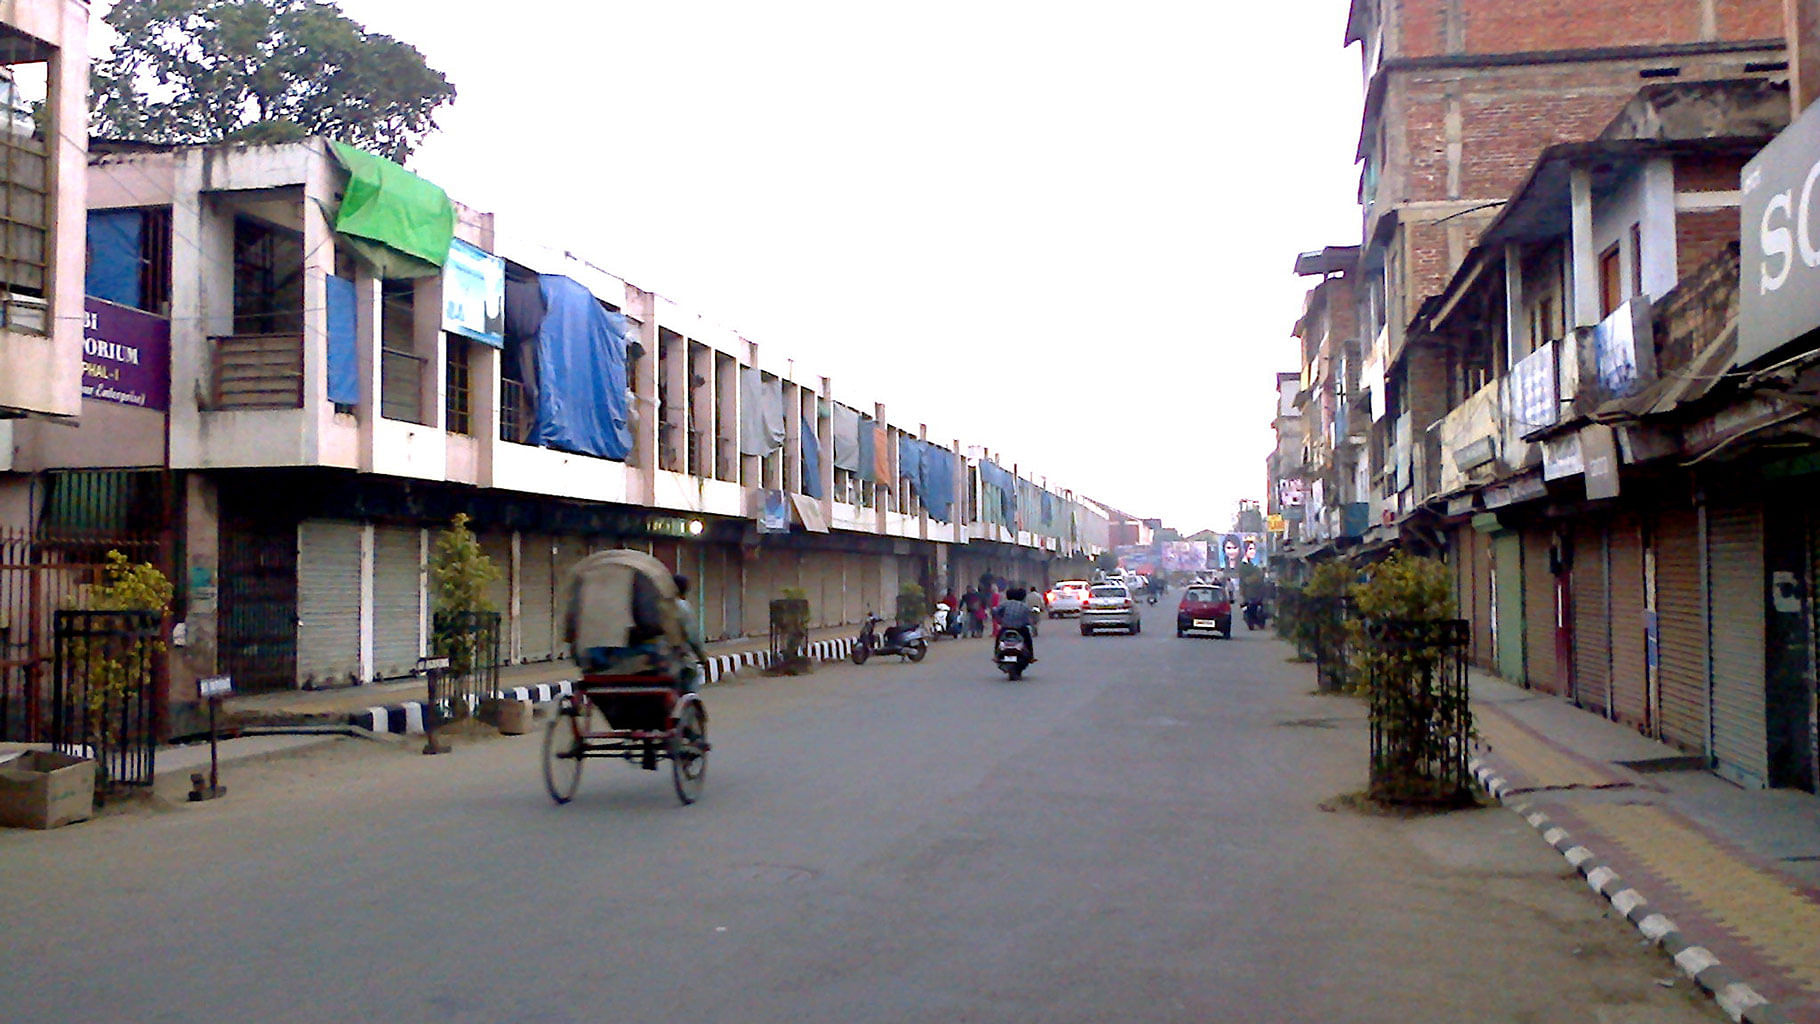 A file photo of Paona Bazaar, Imphal. Image used for representational purpose. (Photo: Wikimedia Commons/<a href="https://commons.wikimedia.org/w/index.php?title=User:Ppyoonus&amp;action=edit&amp;redlink=1">PP Yoonus</a>)